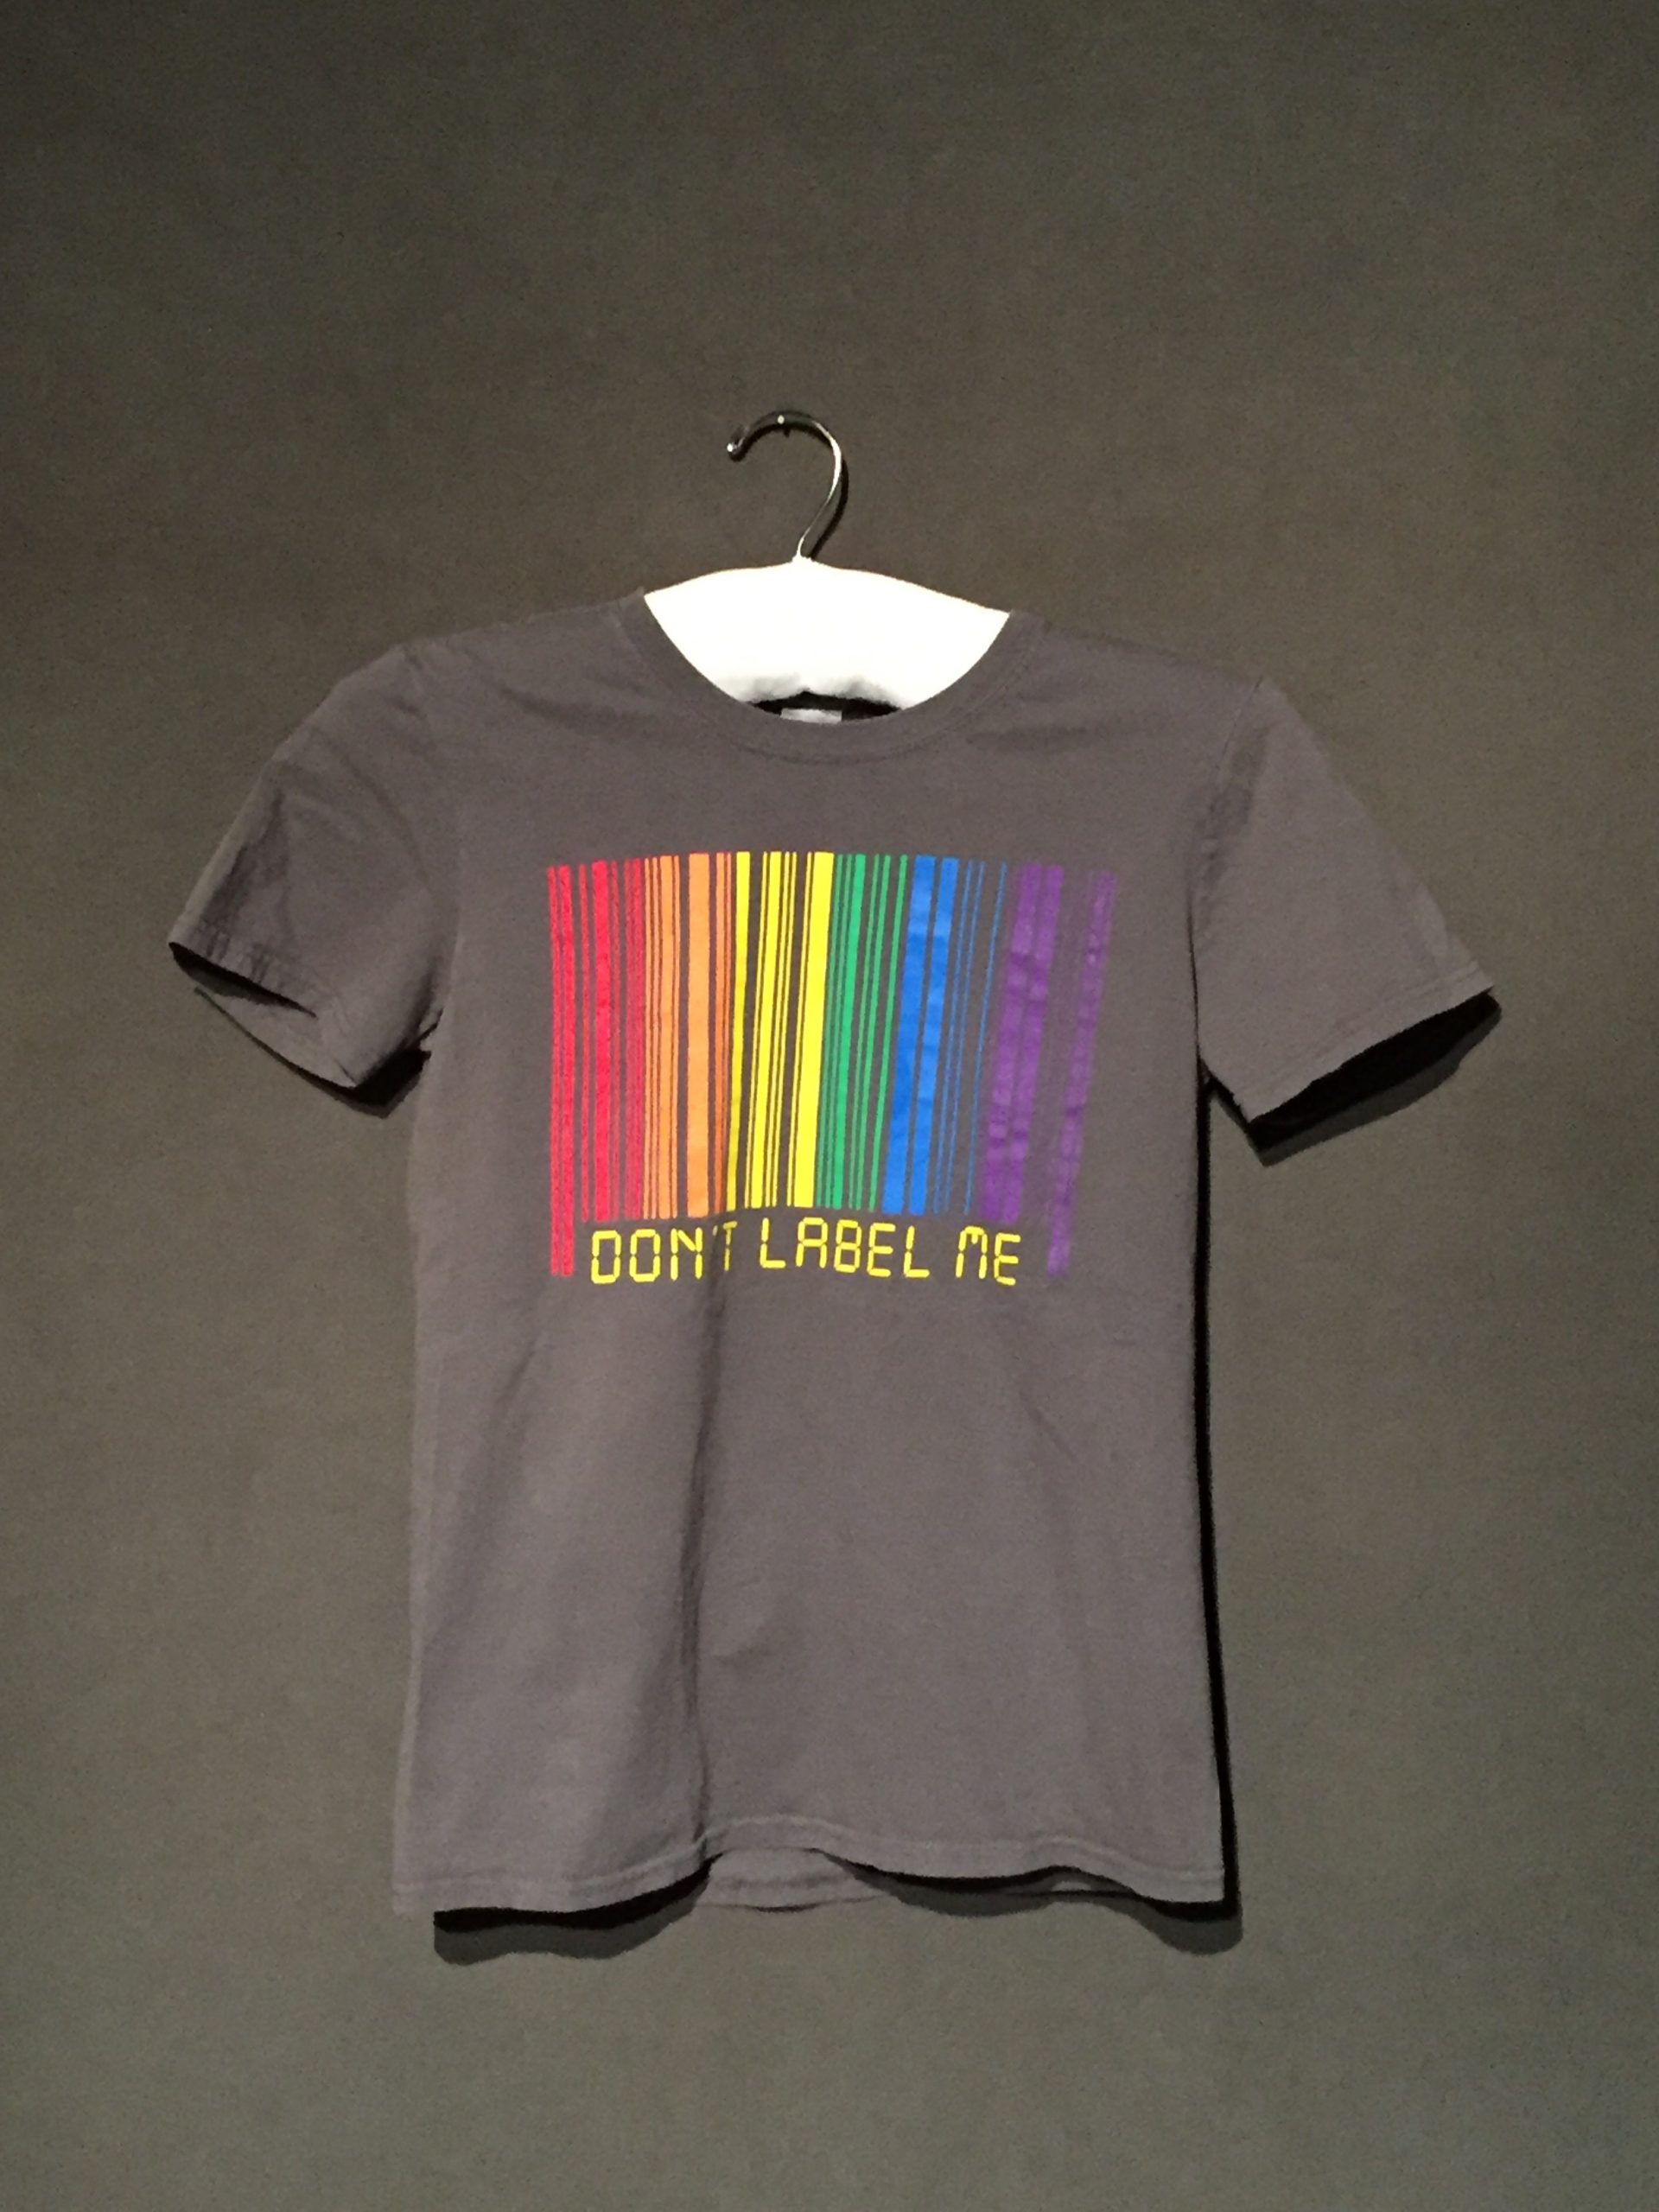 Dark grey short sleeve t-shirt with rainbow barcode and yellow text reading: "Don't Label Me"